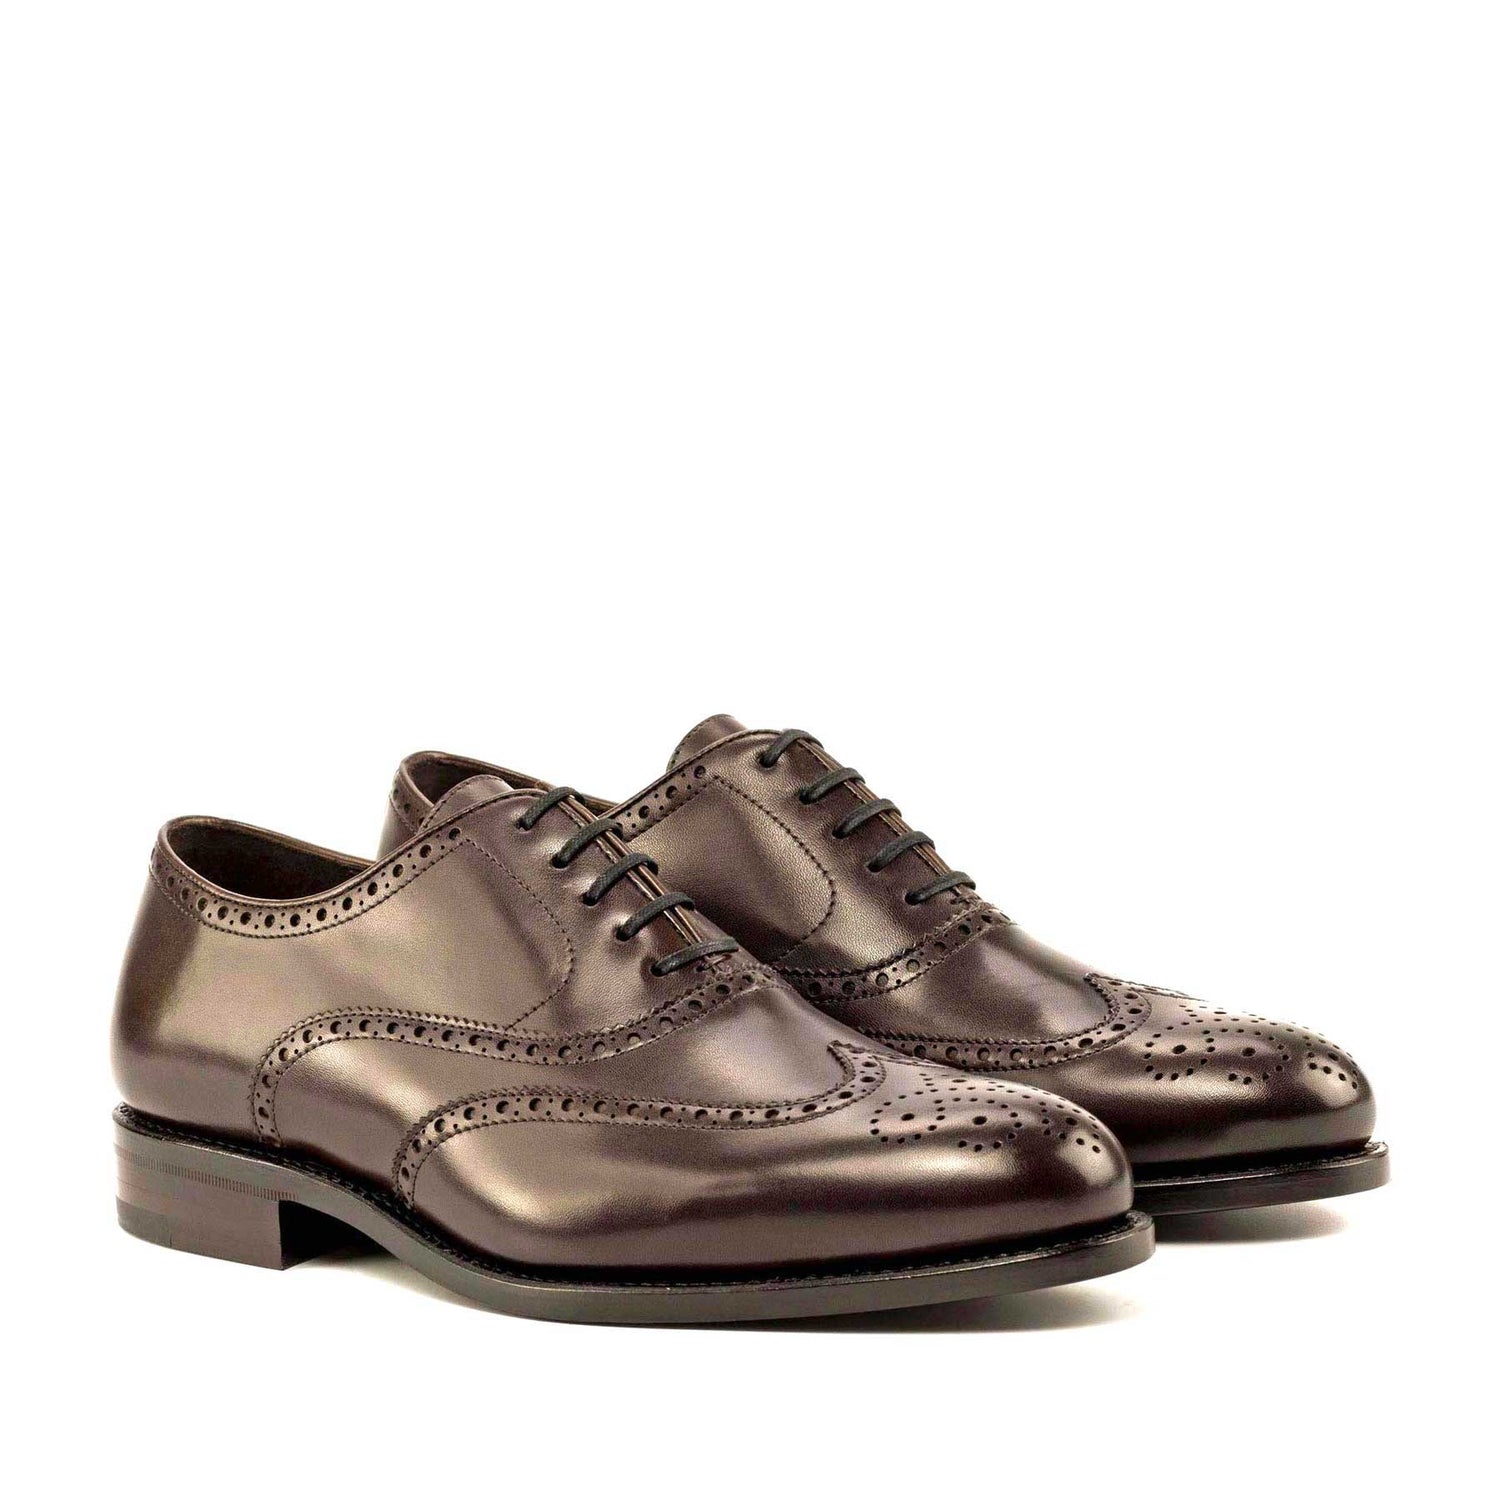 Full Brogue Oxford in Dark Brown Box Calf - Zatorres | Free Shipping on orders over $200